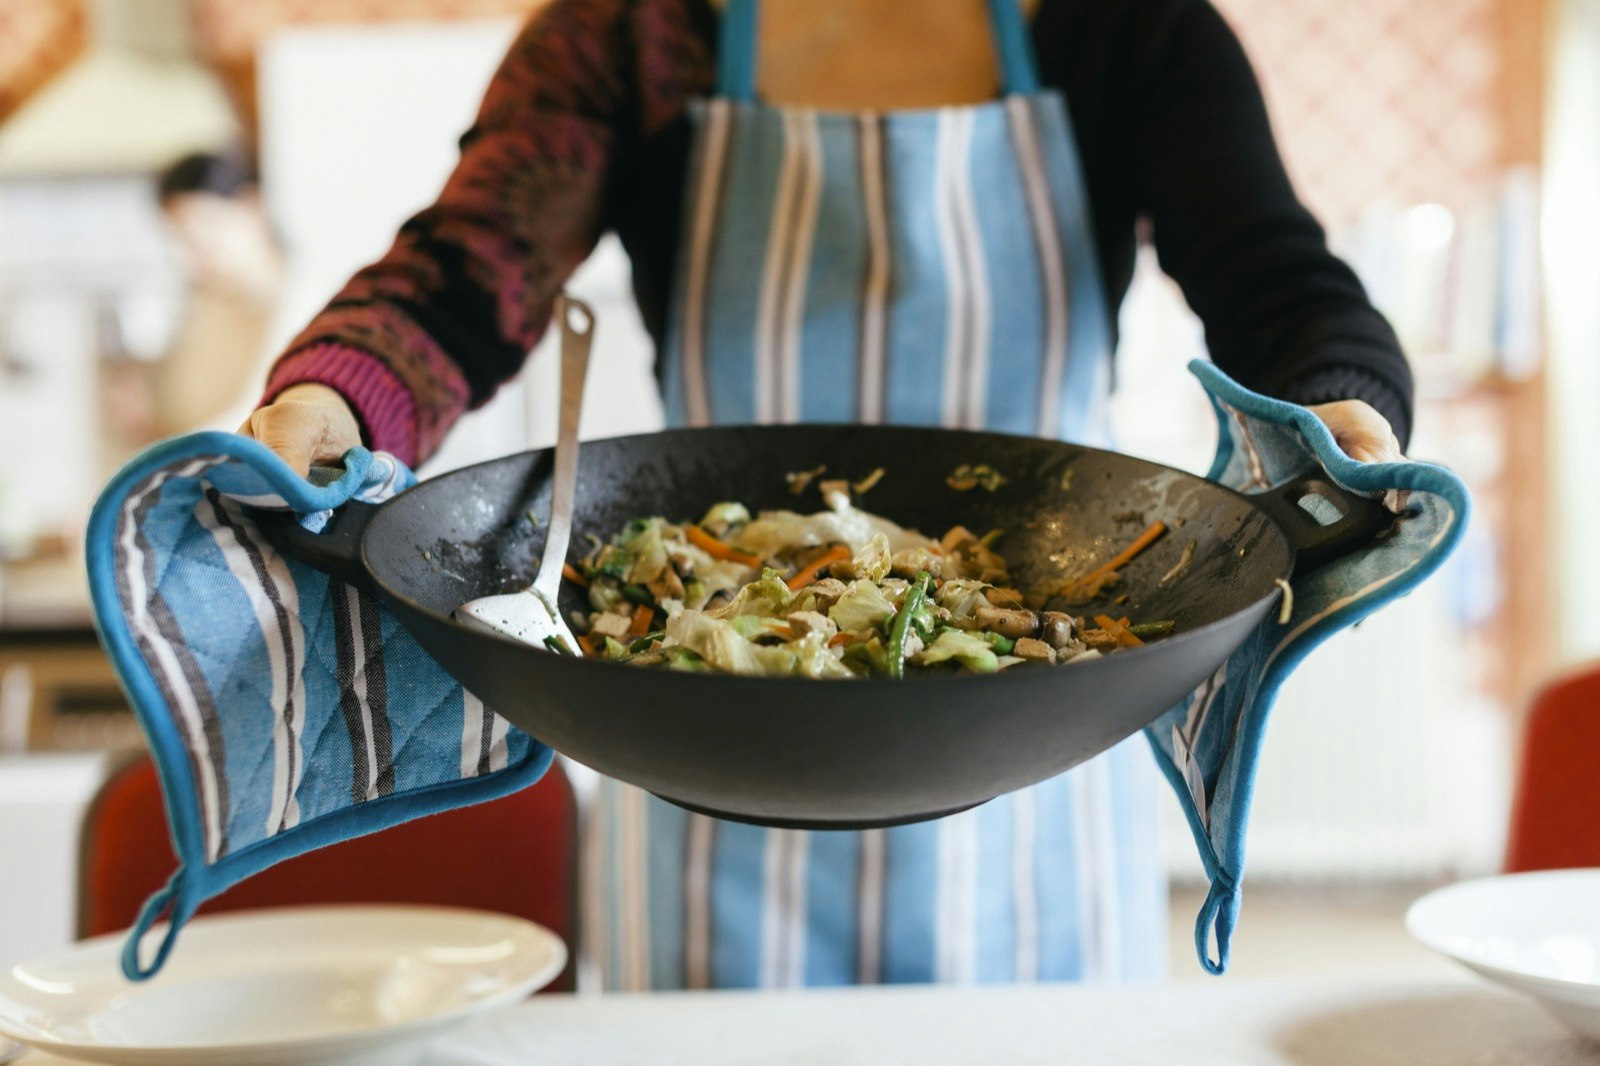 A woman serves food in a large wok